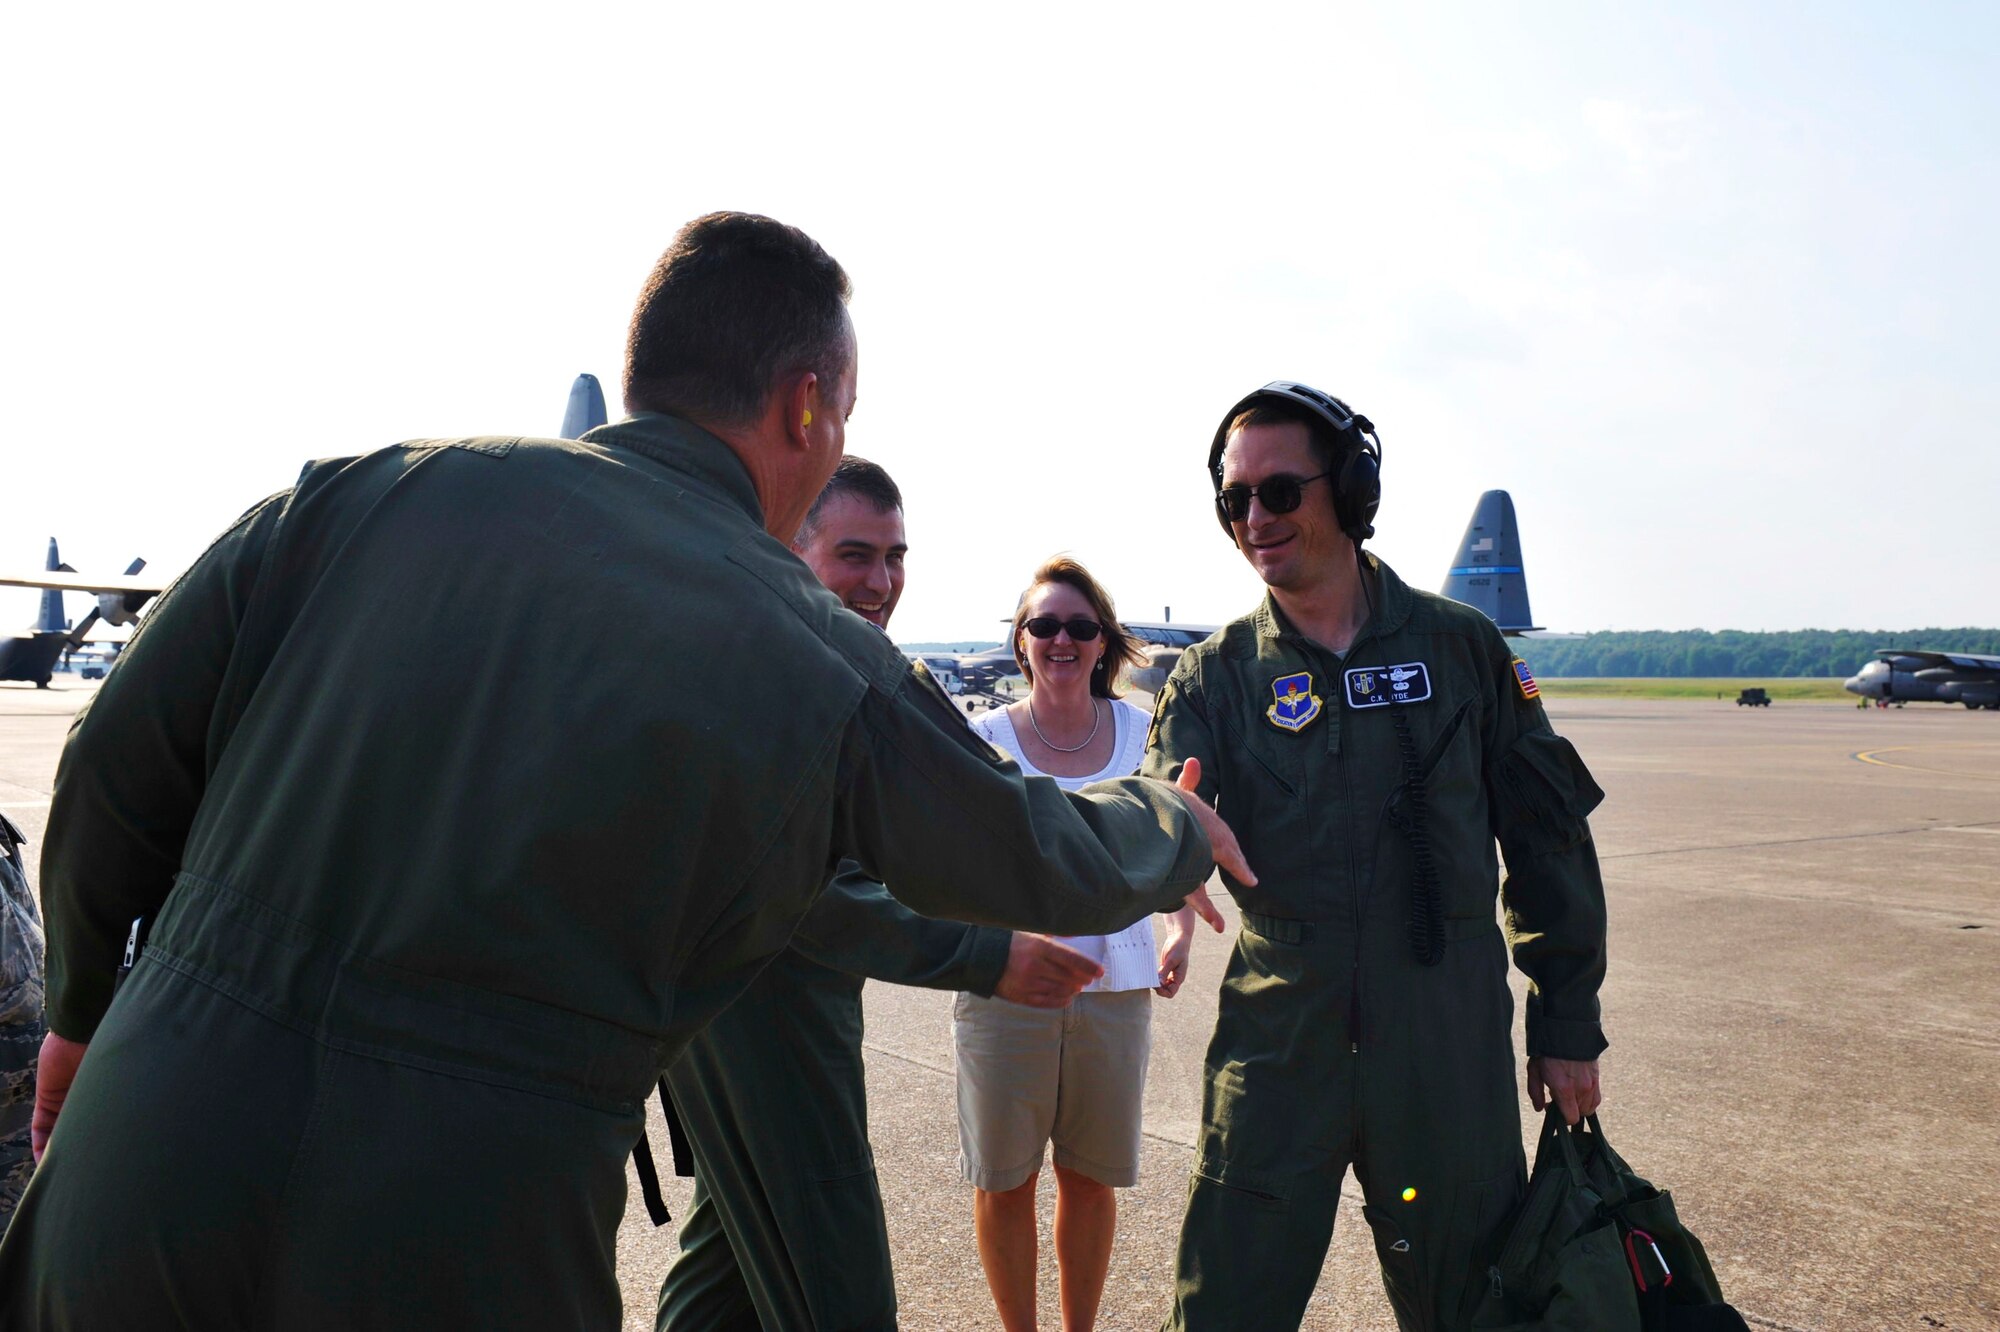 Col. C.K. Hyde, 314th Airlift Wing commander, is greeted by family and friends after completing his 4000th flight hour Aug. 27. (U.S. Air Force photo by Airman Lausanne Pacheco)